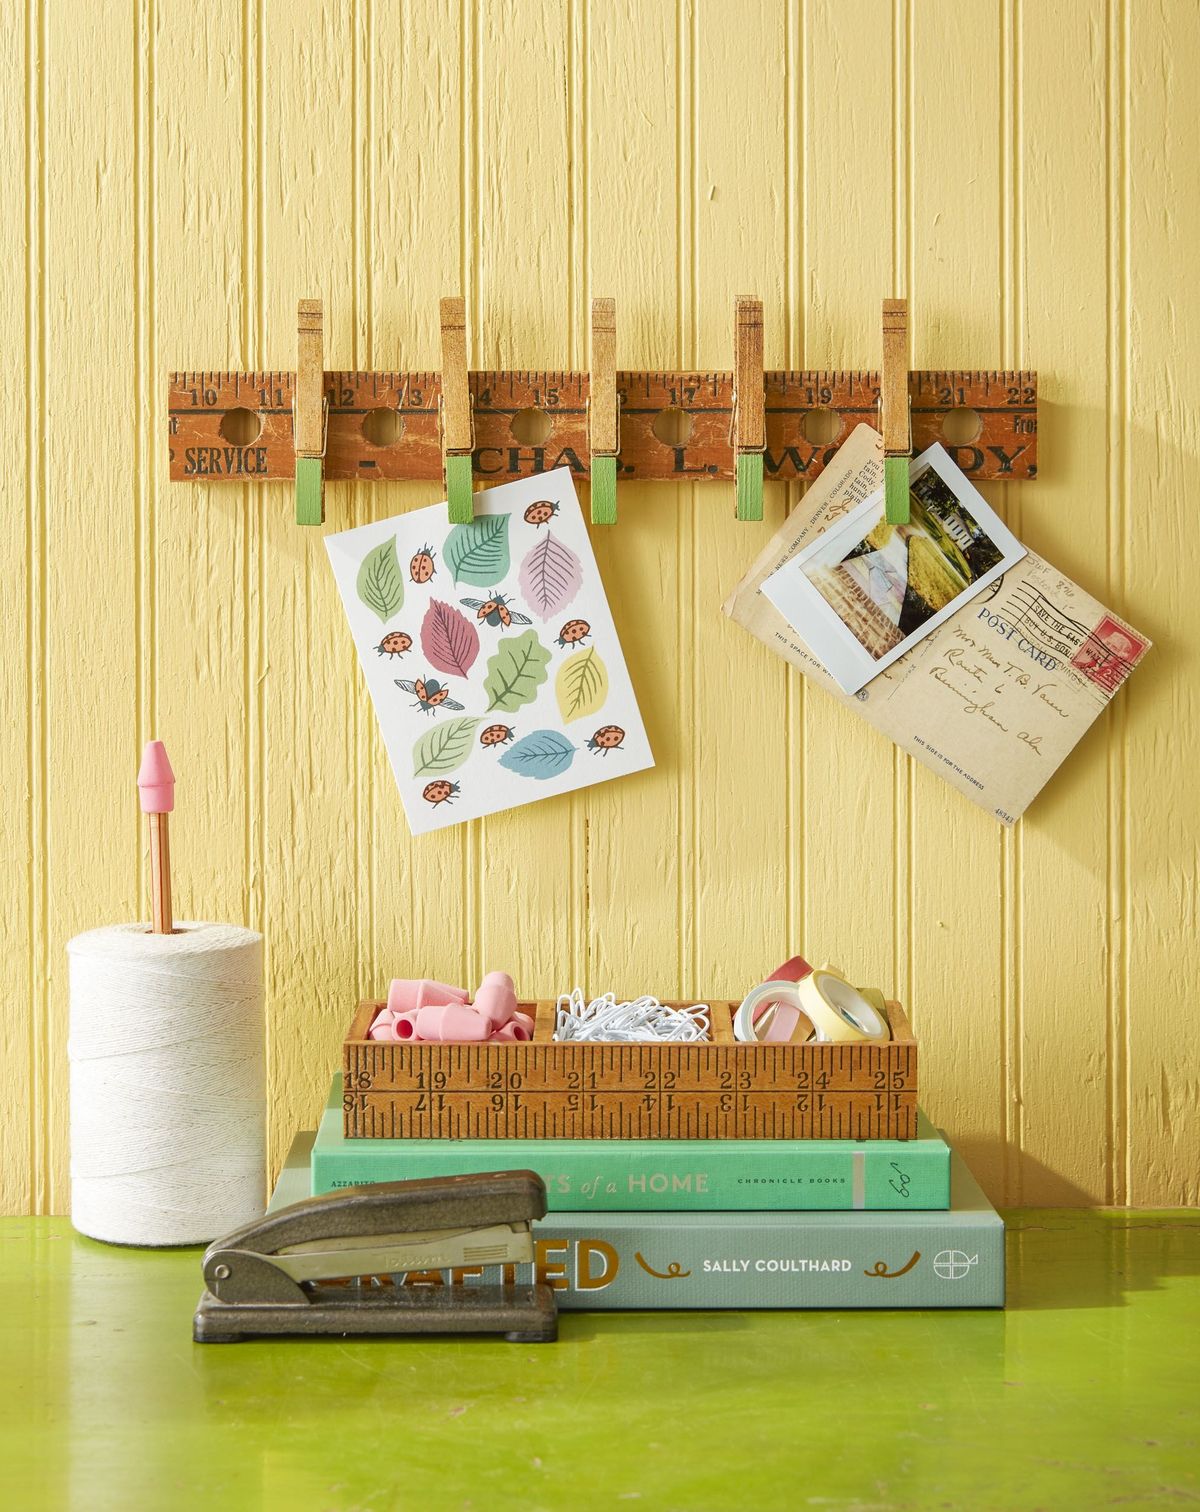 clothespin mail holder and other fall crafts